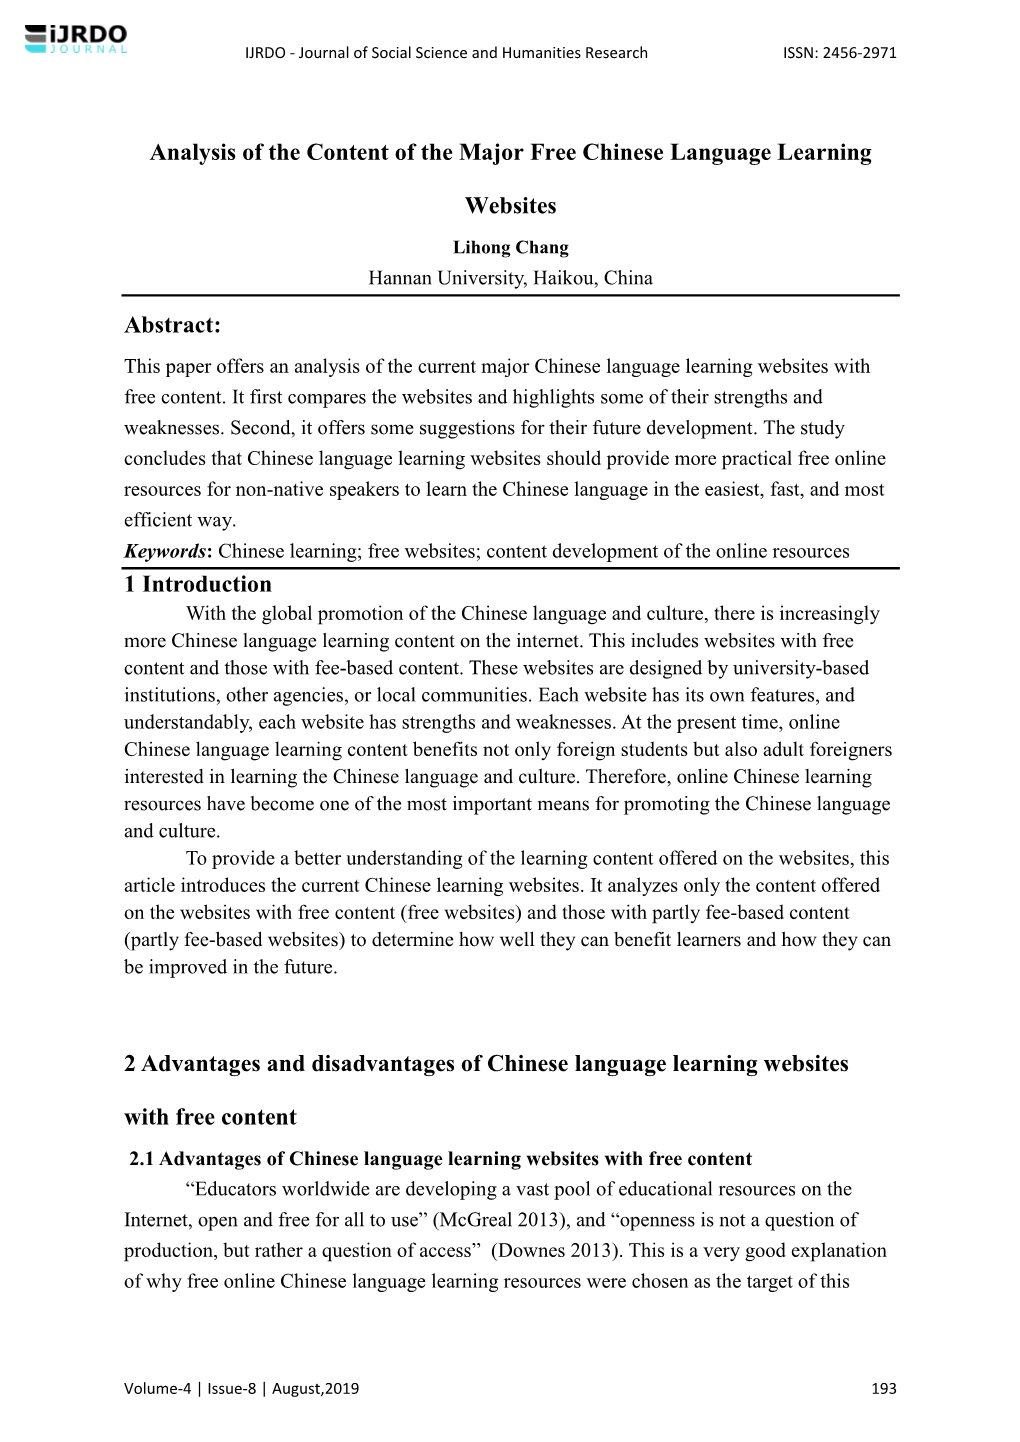 Analysis of the Content of the Major Free Chinese Language Learning